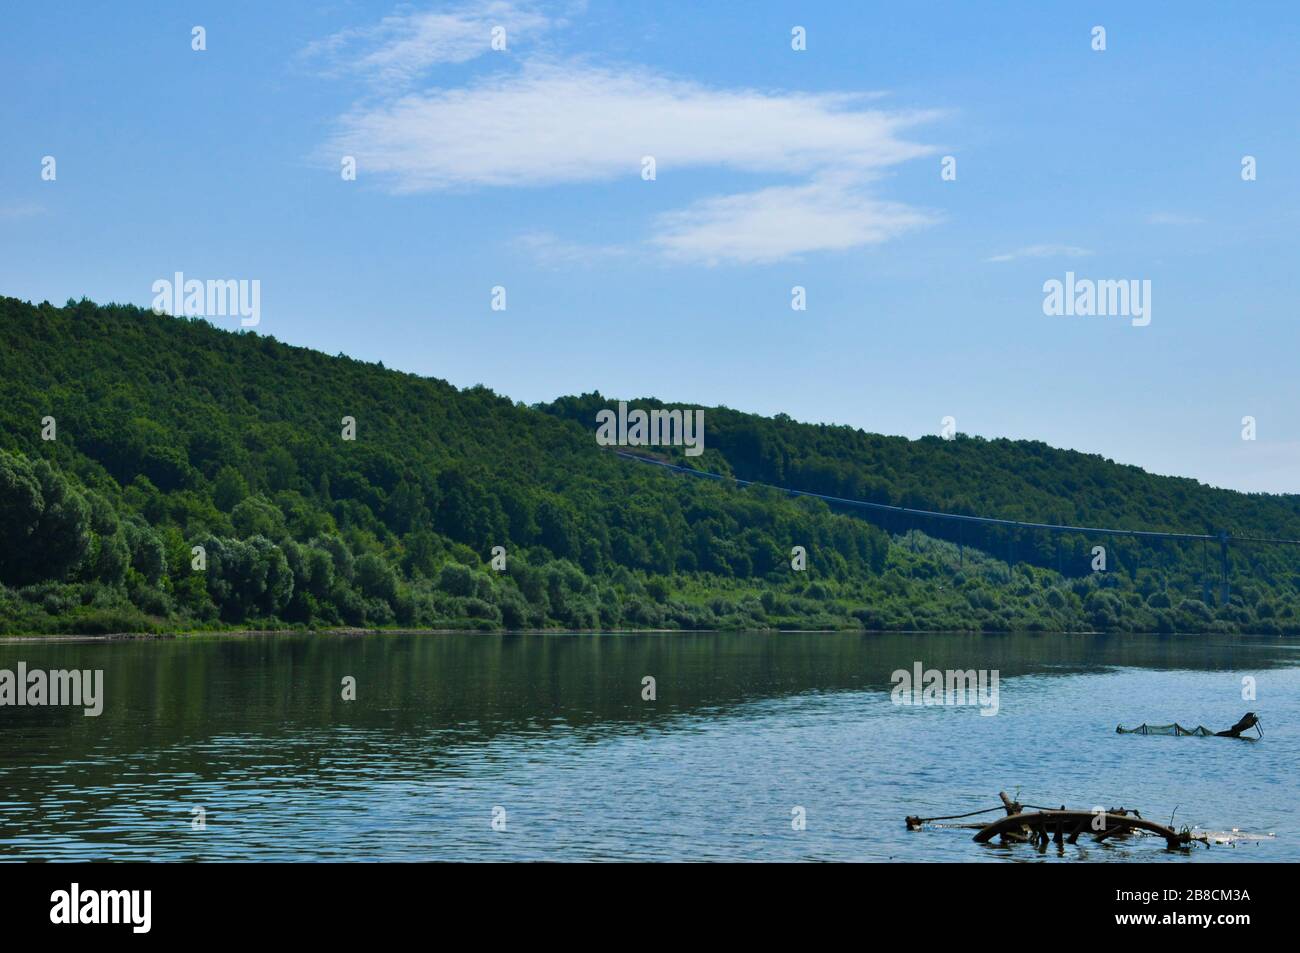 Riverscape on a summer day with Oka river, forest growing on a river bank and cloudy sky. Stock Photo